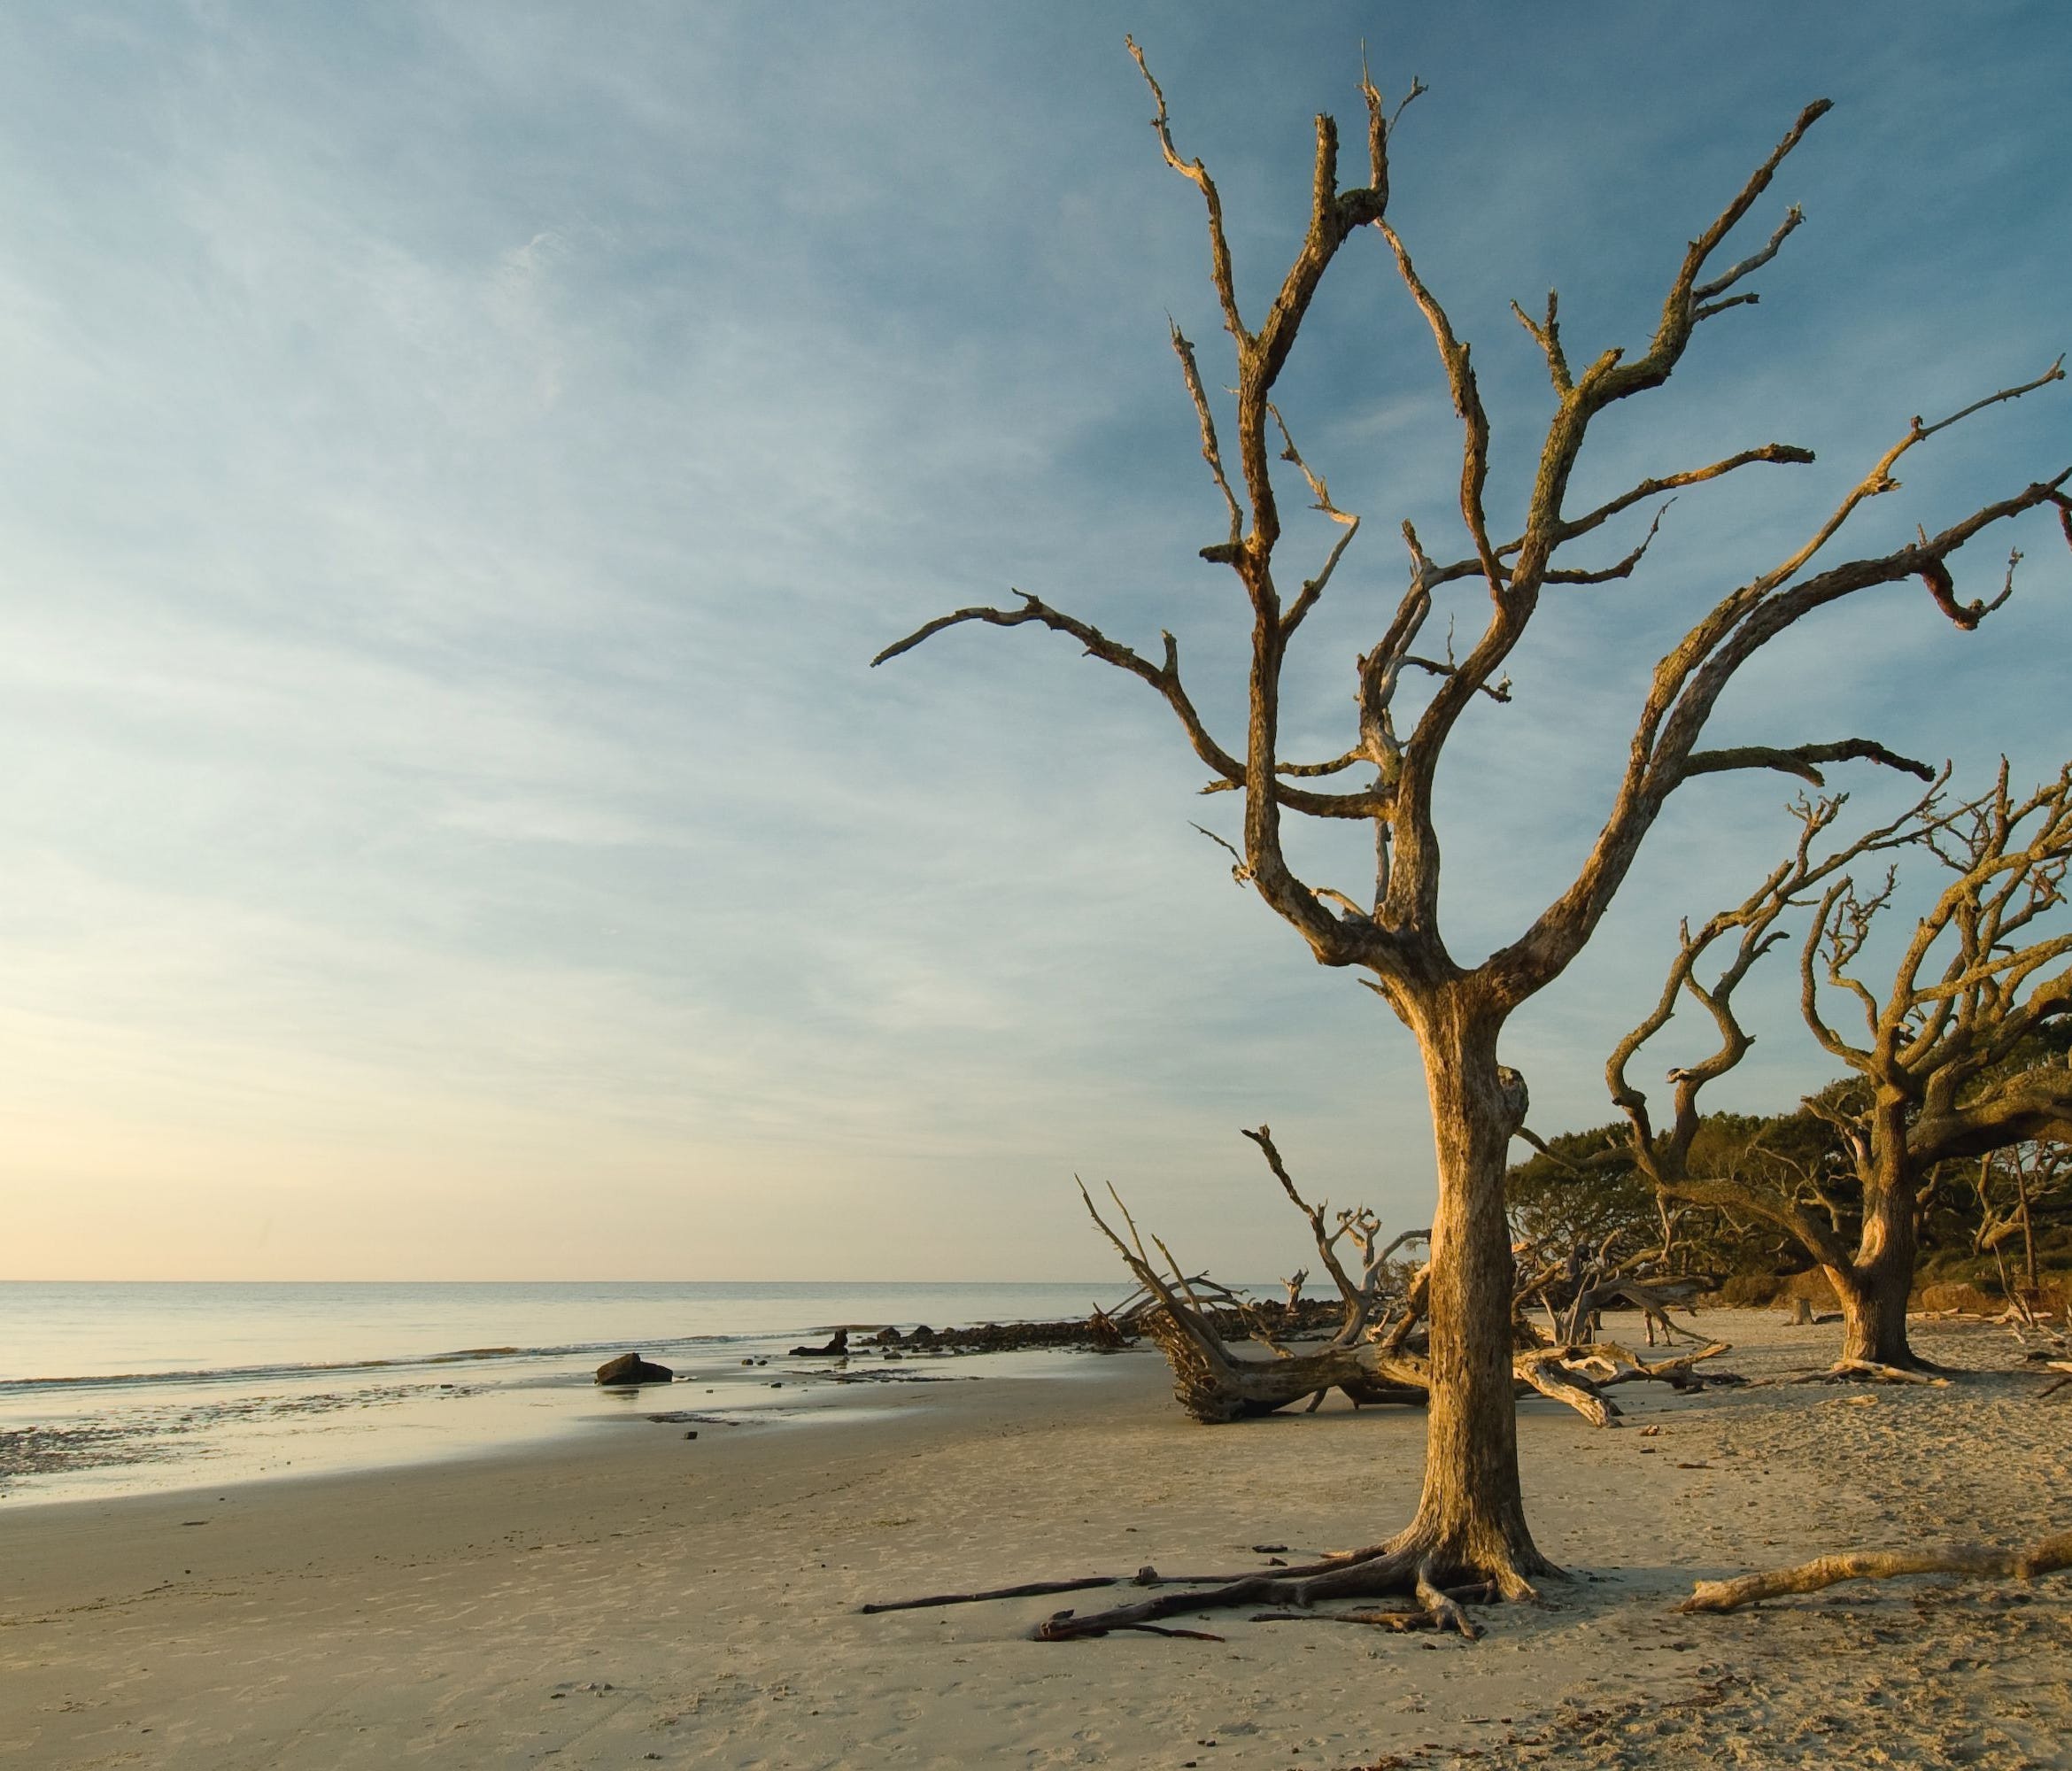 While you're in St. Simons, be sure to check out nearby Jekyll Island — its famous Driftwood Beach, dotted with magnificent tree limbs that have washed ashore, is a hotspot for photographs.